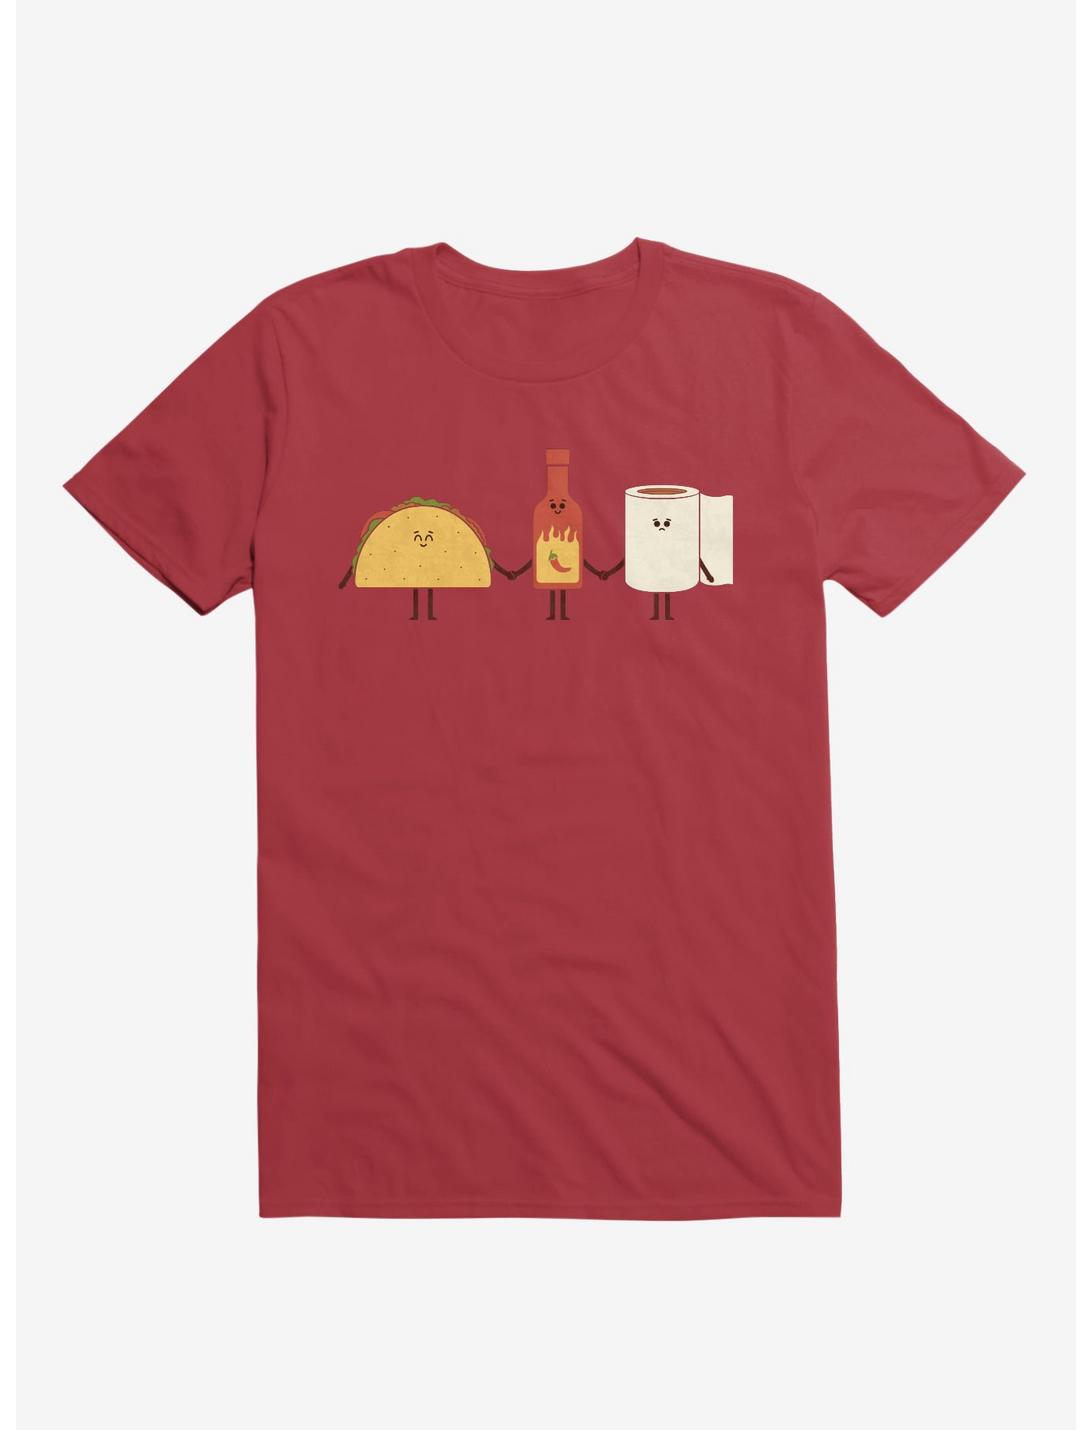 Taco, Hot Sauce, Toilet Paper Friends Red T-Shirt, RED, hi-res